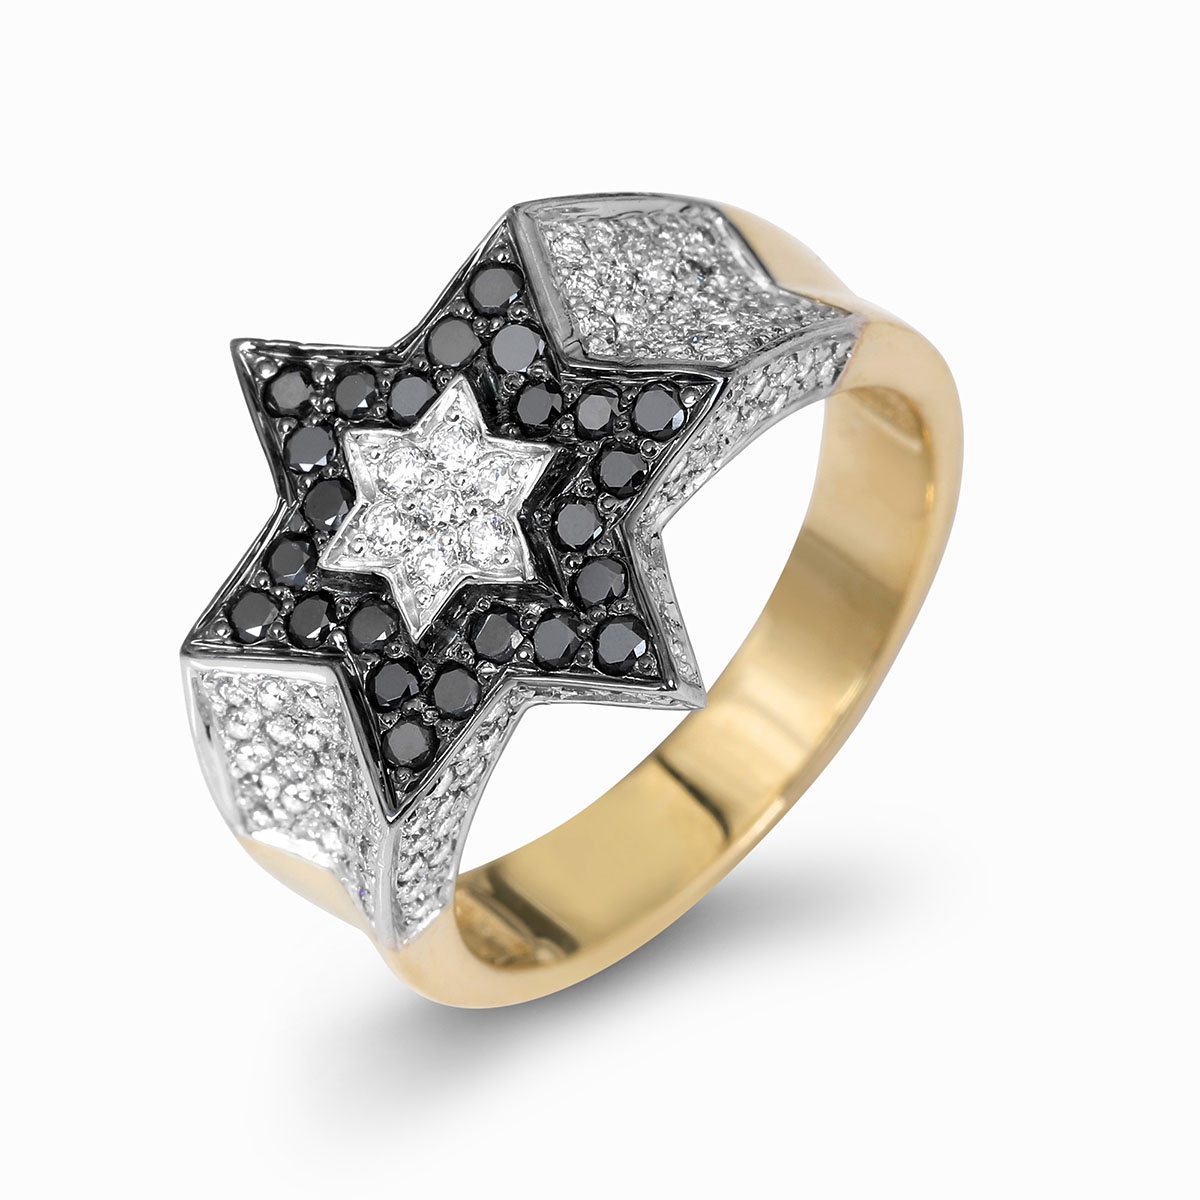 Anbinder Jewelry Two-Toned 14K Gold Star of David Ring With White and Black Diamonds - 1